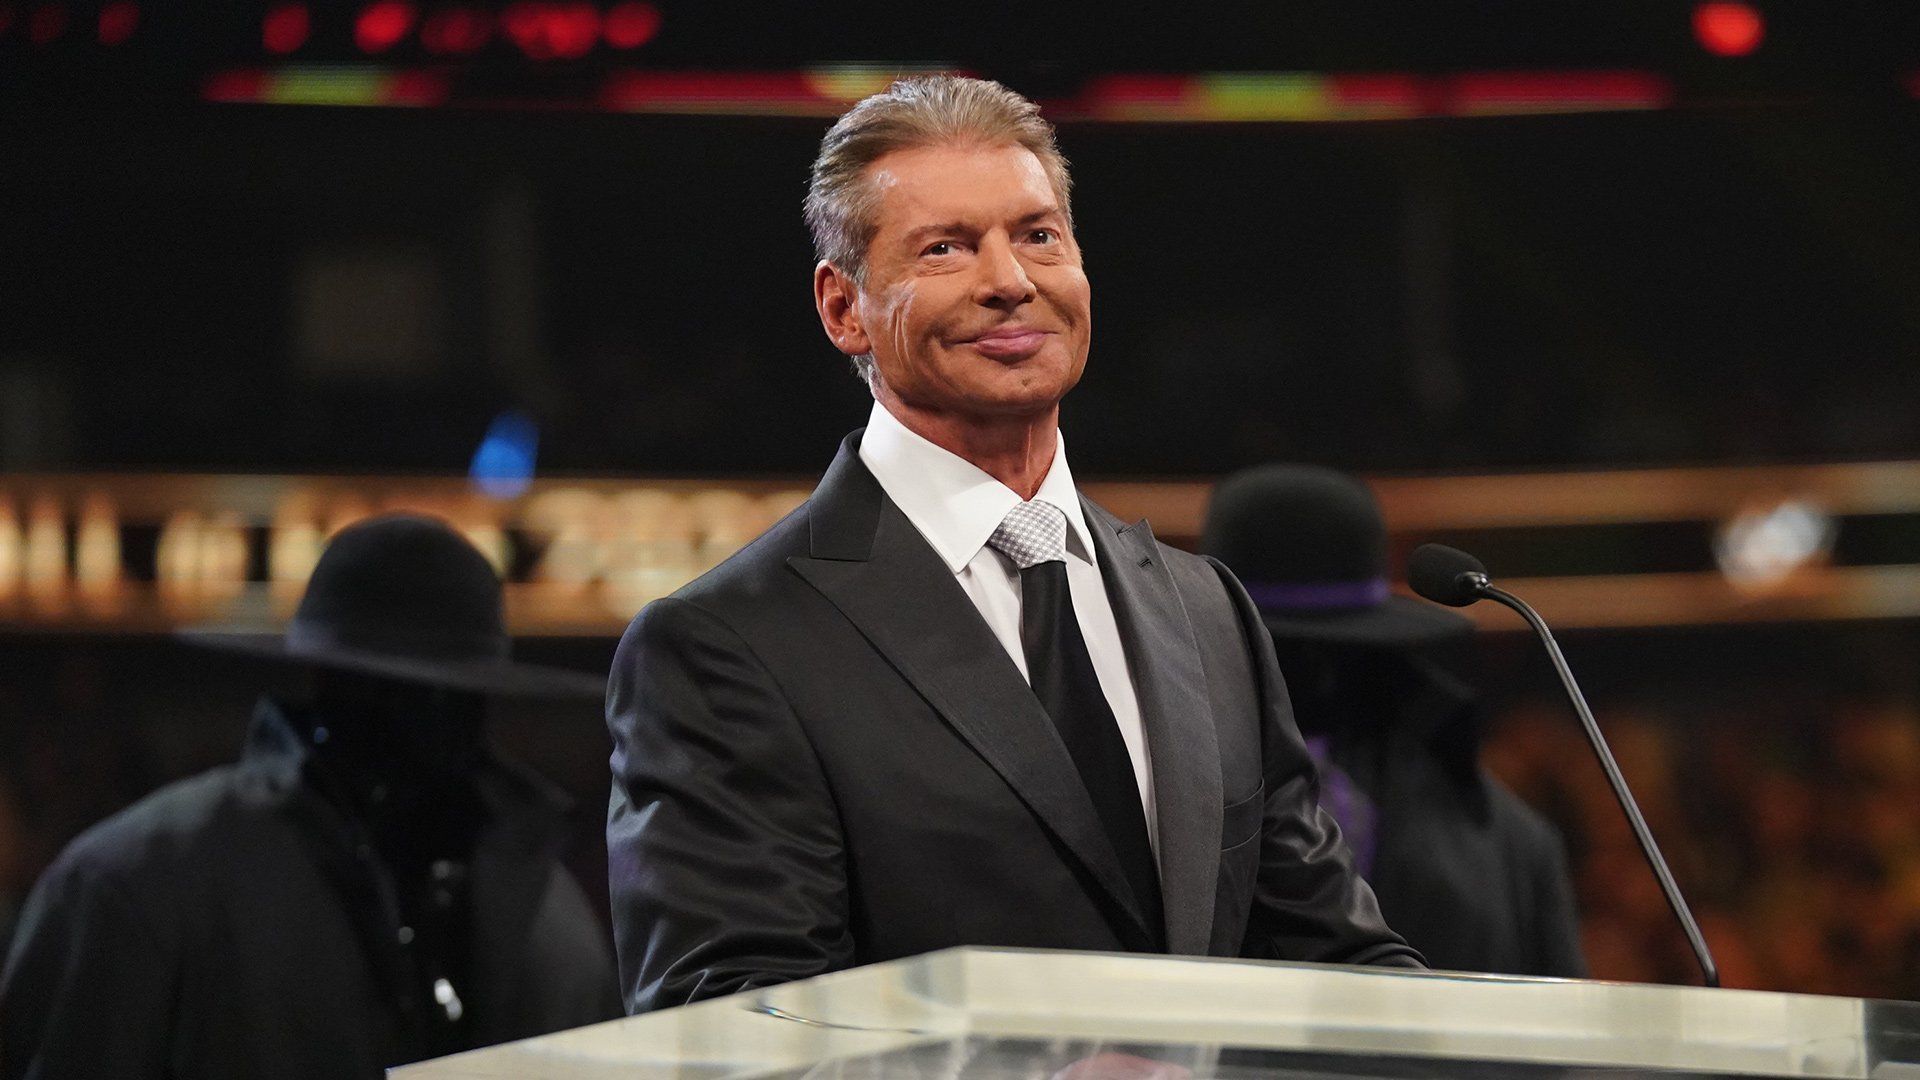 Former WWE CEO Vince McMahon